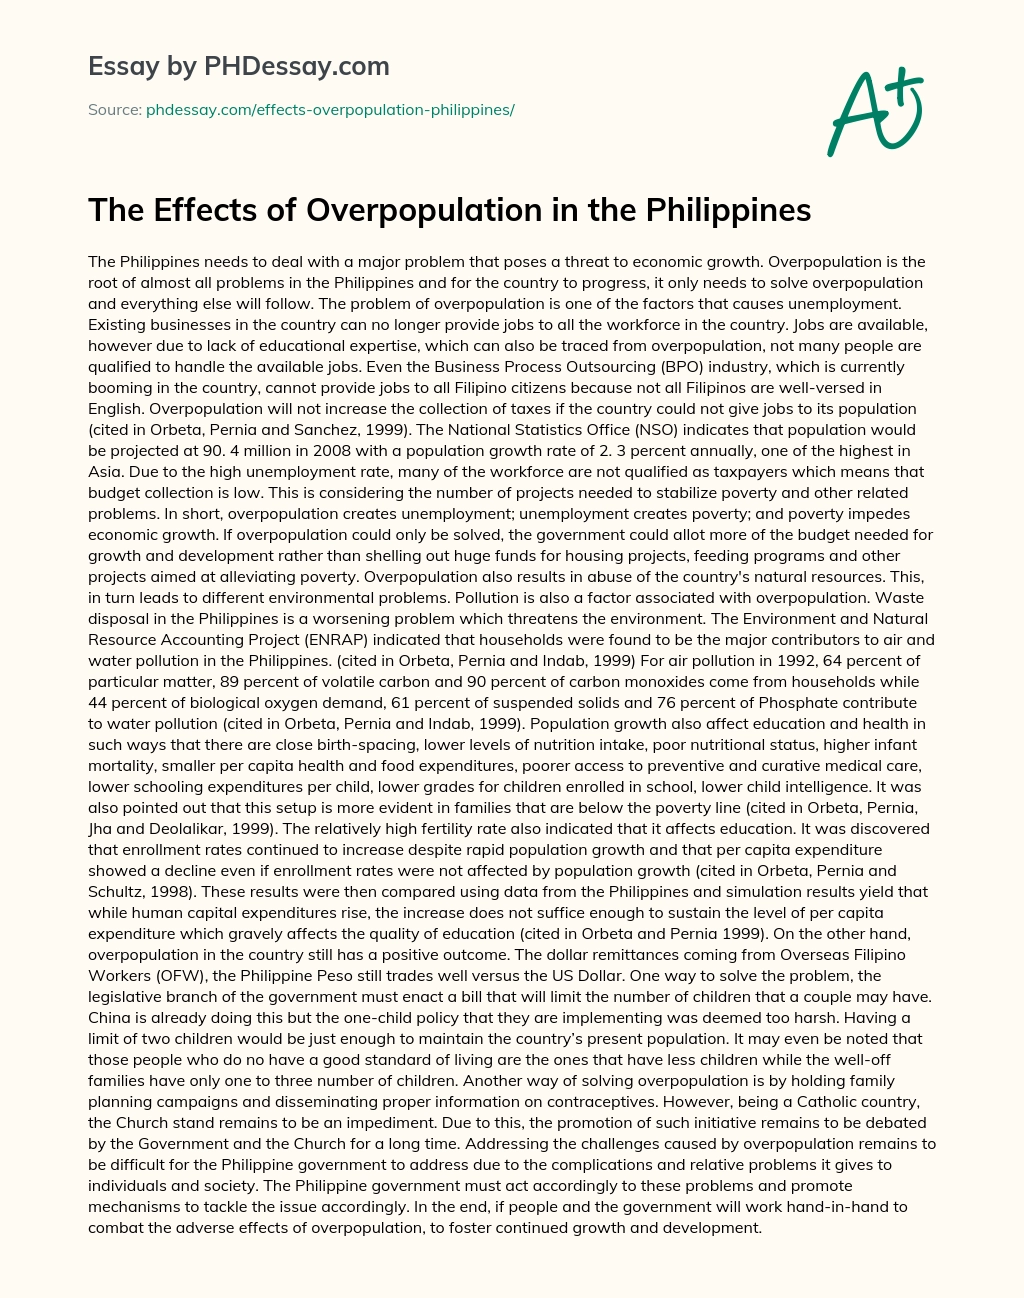 The Effects of Overpopulation in the Philippines essay